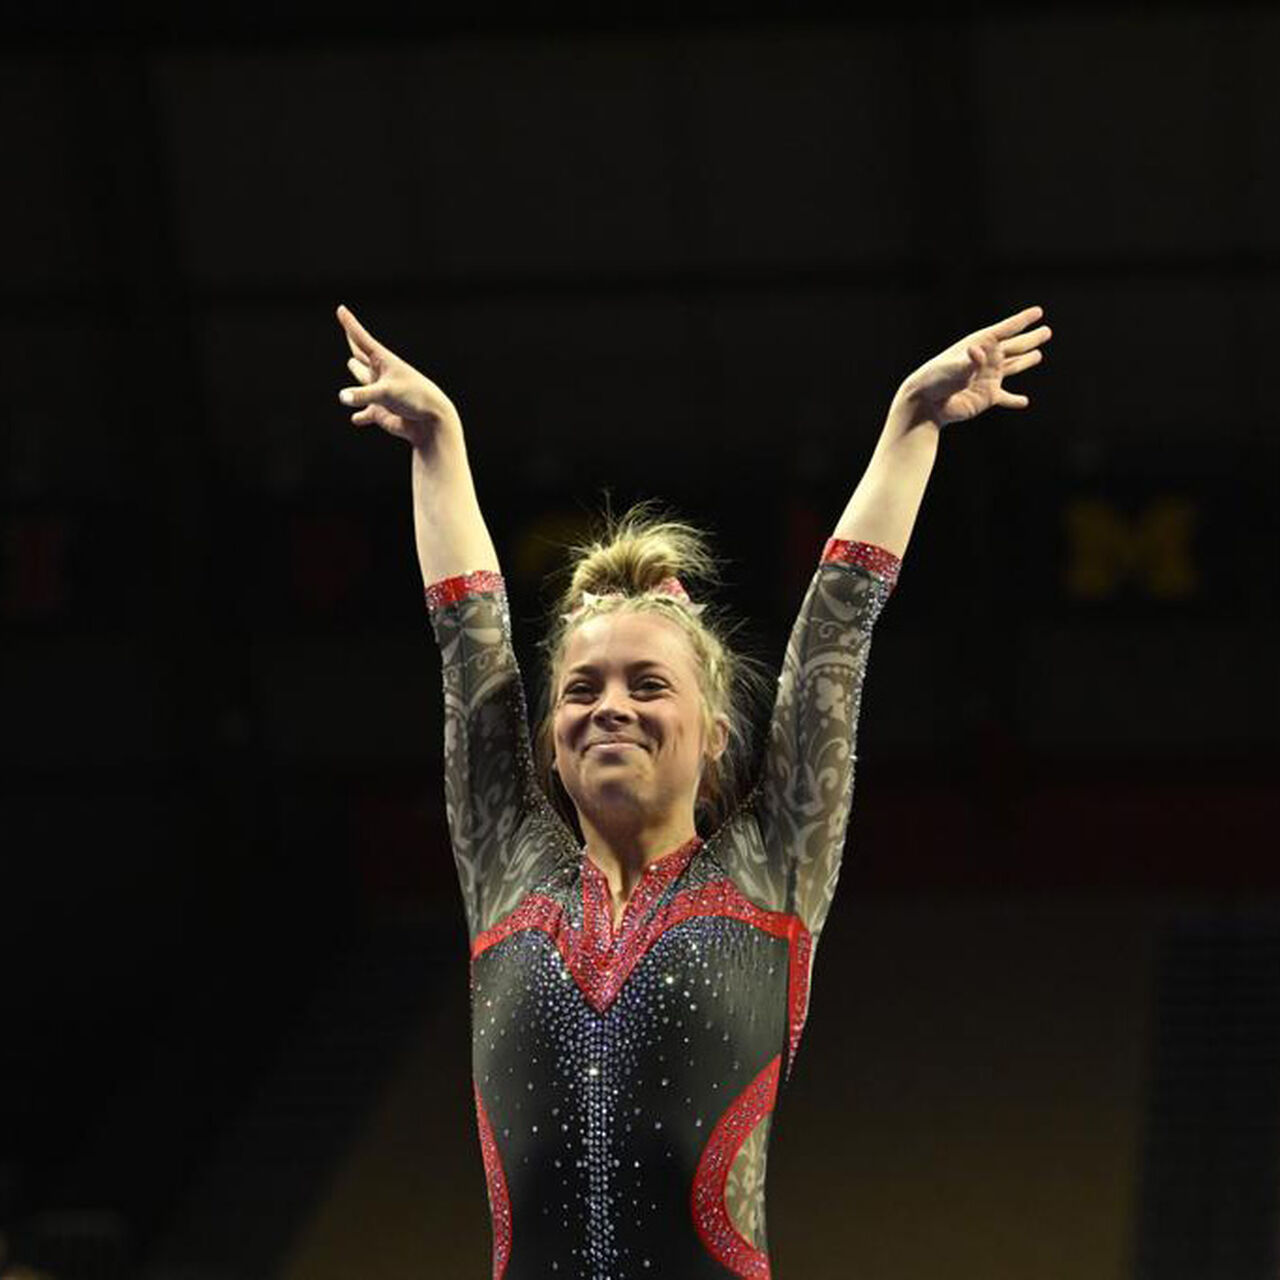 Rutgers Gymnastics team member holding her arms over her air during a routine image number 0